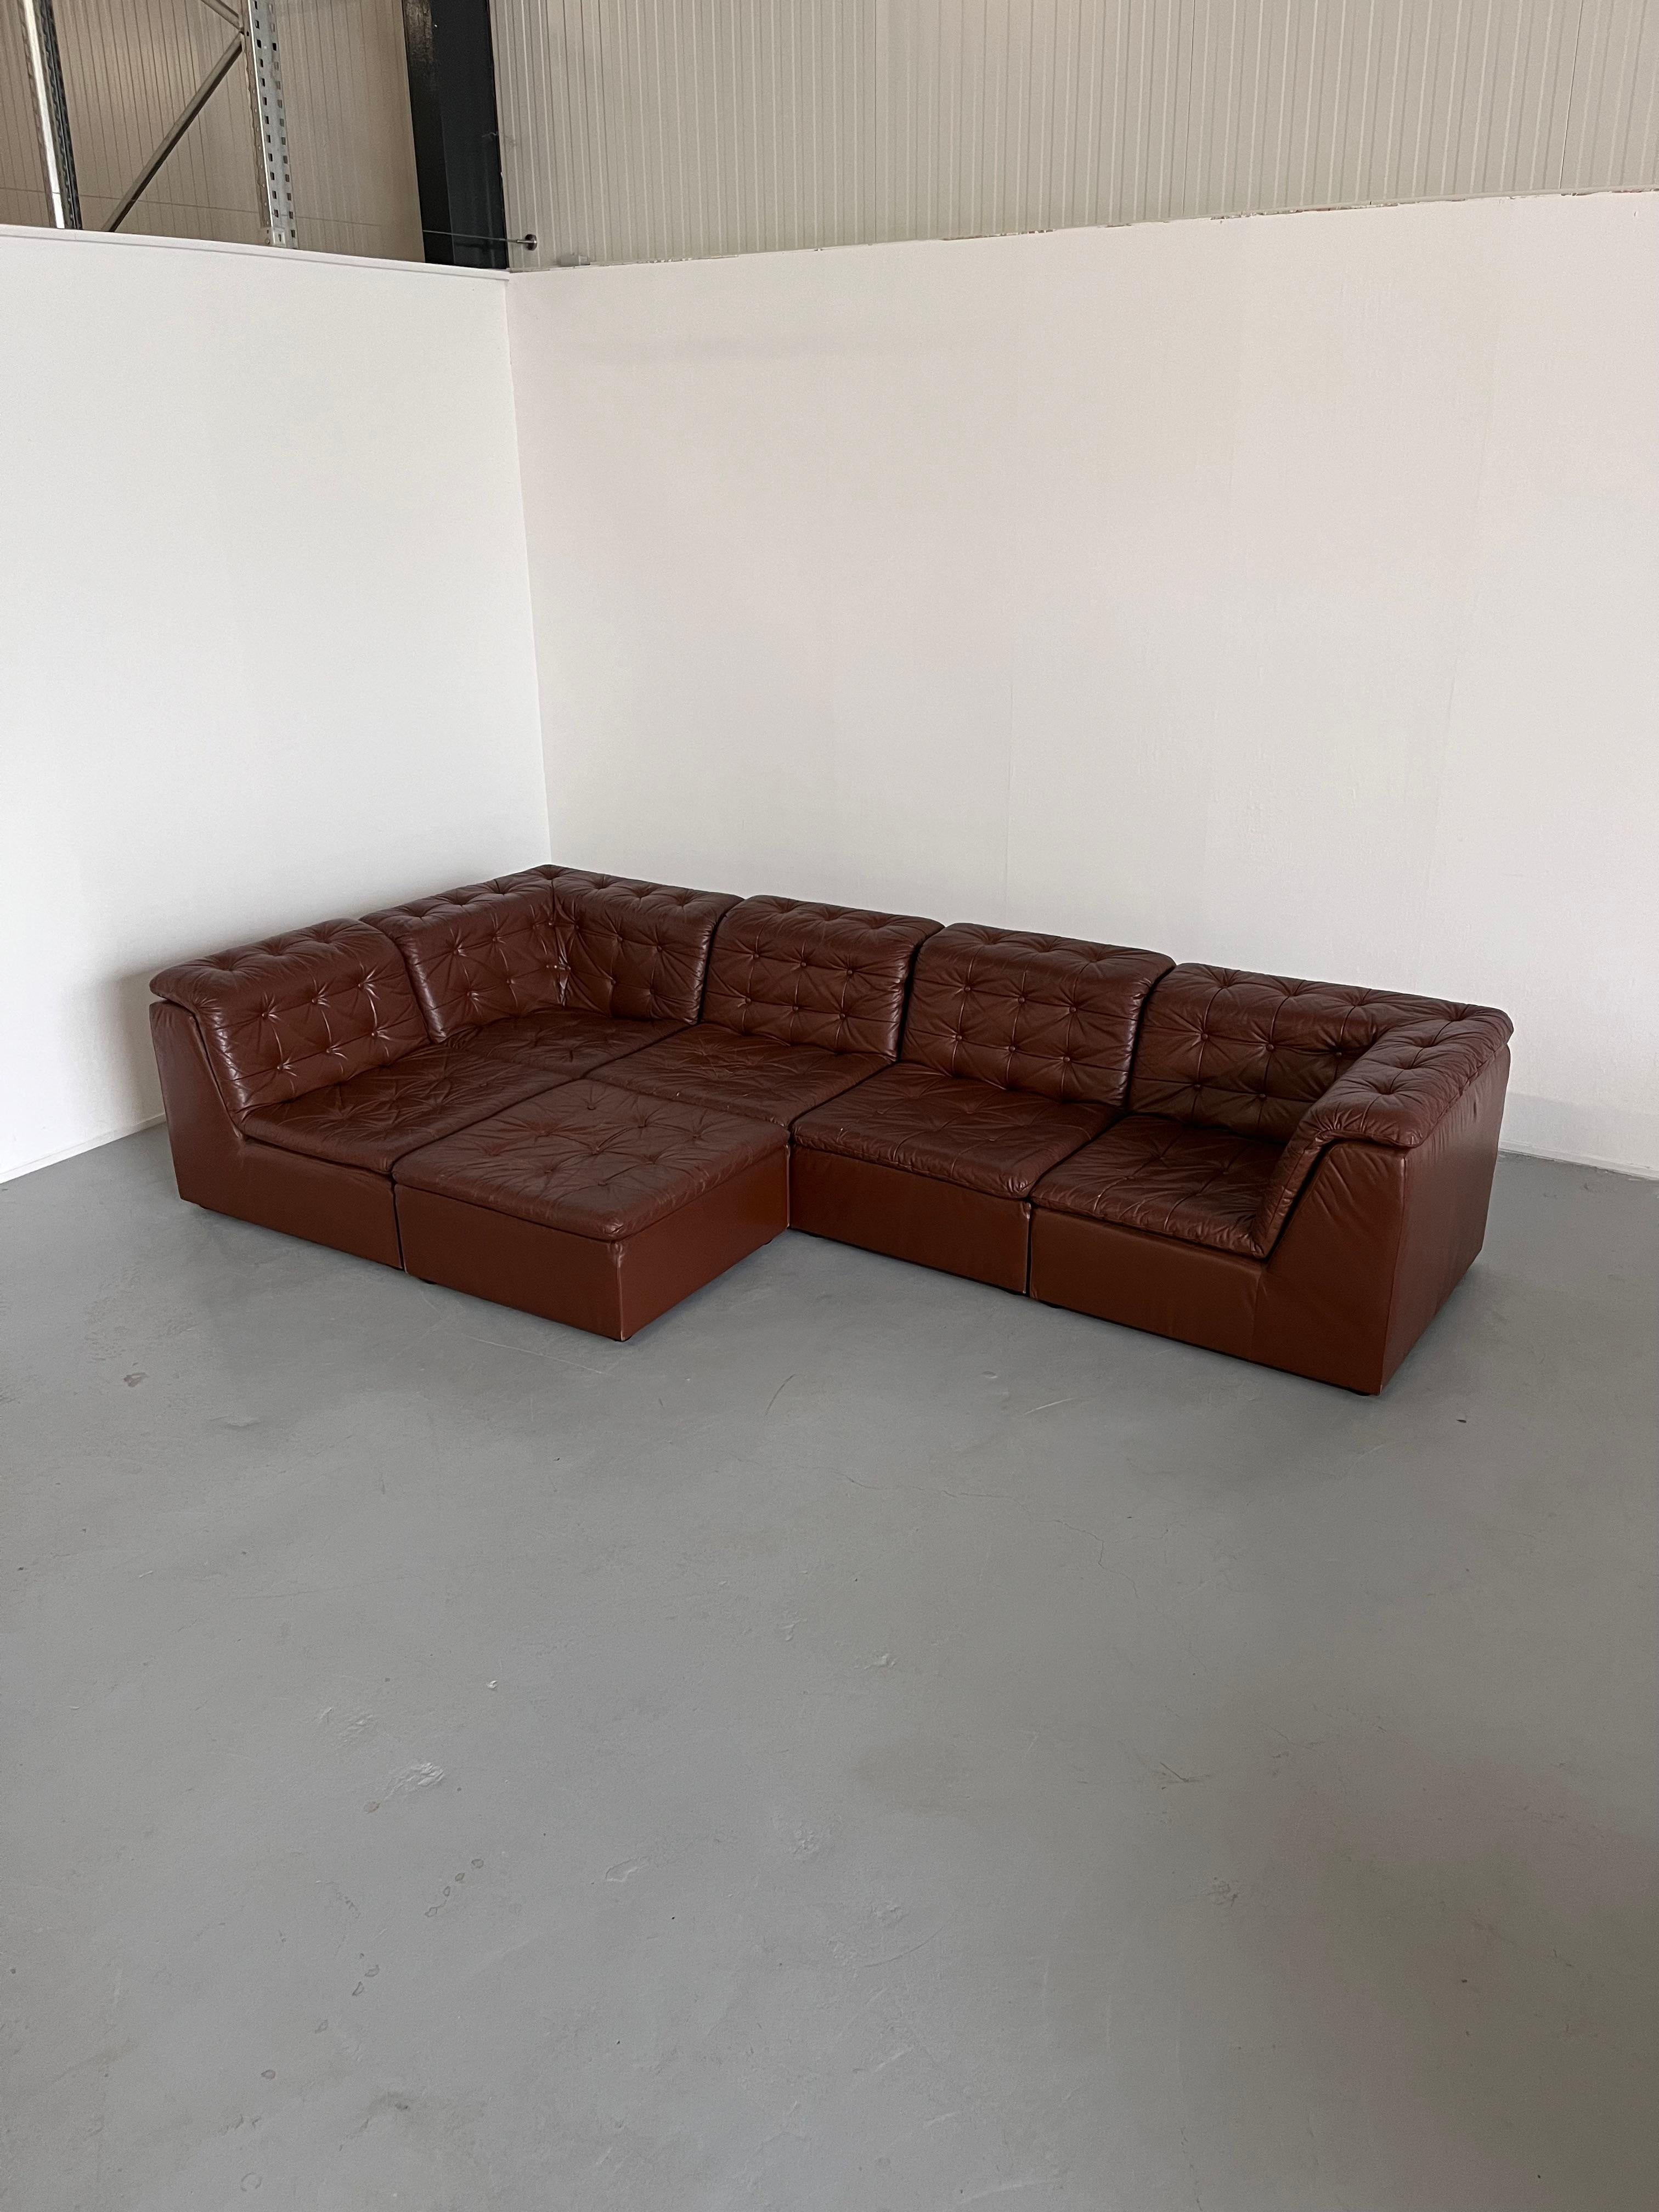 Vintage Patchwork Cognac Leather Six-Part Modular Sofa by Laauser, 1970s Germany For Sale 5